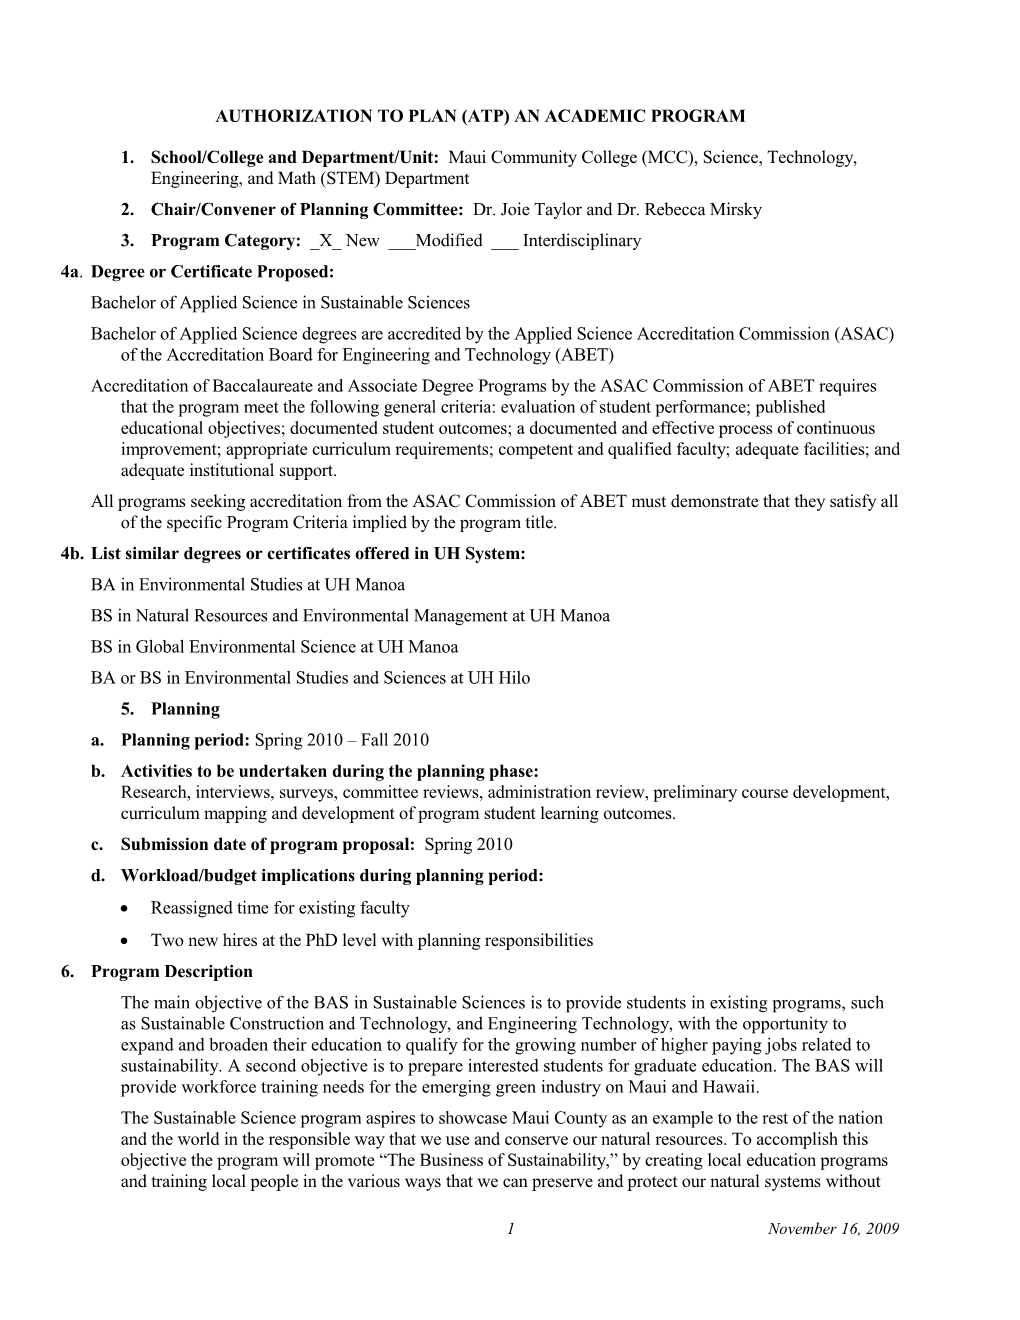 AUTHORIZATION TO PLAN (ATP) AN ACADEMIC PROGRAM (Revised 06/12/07)